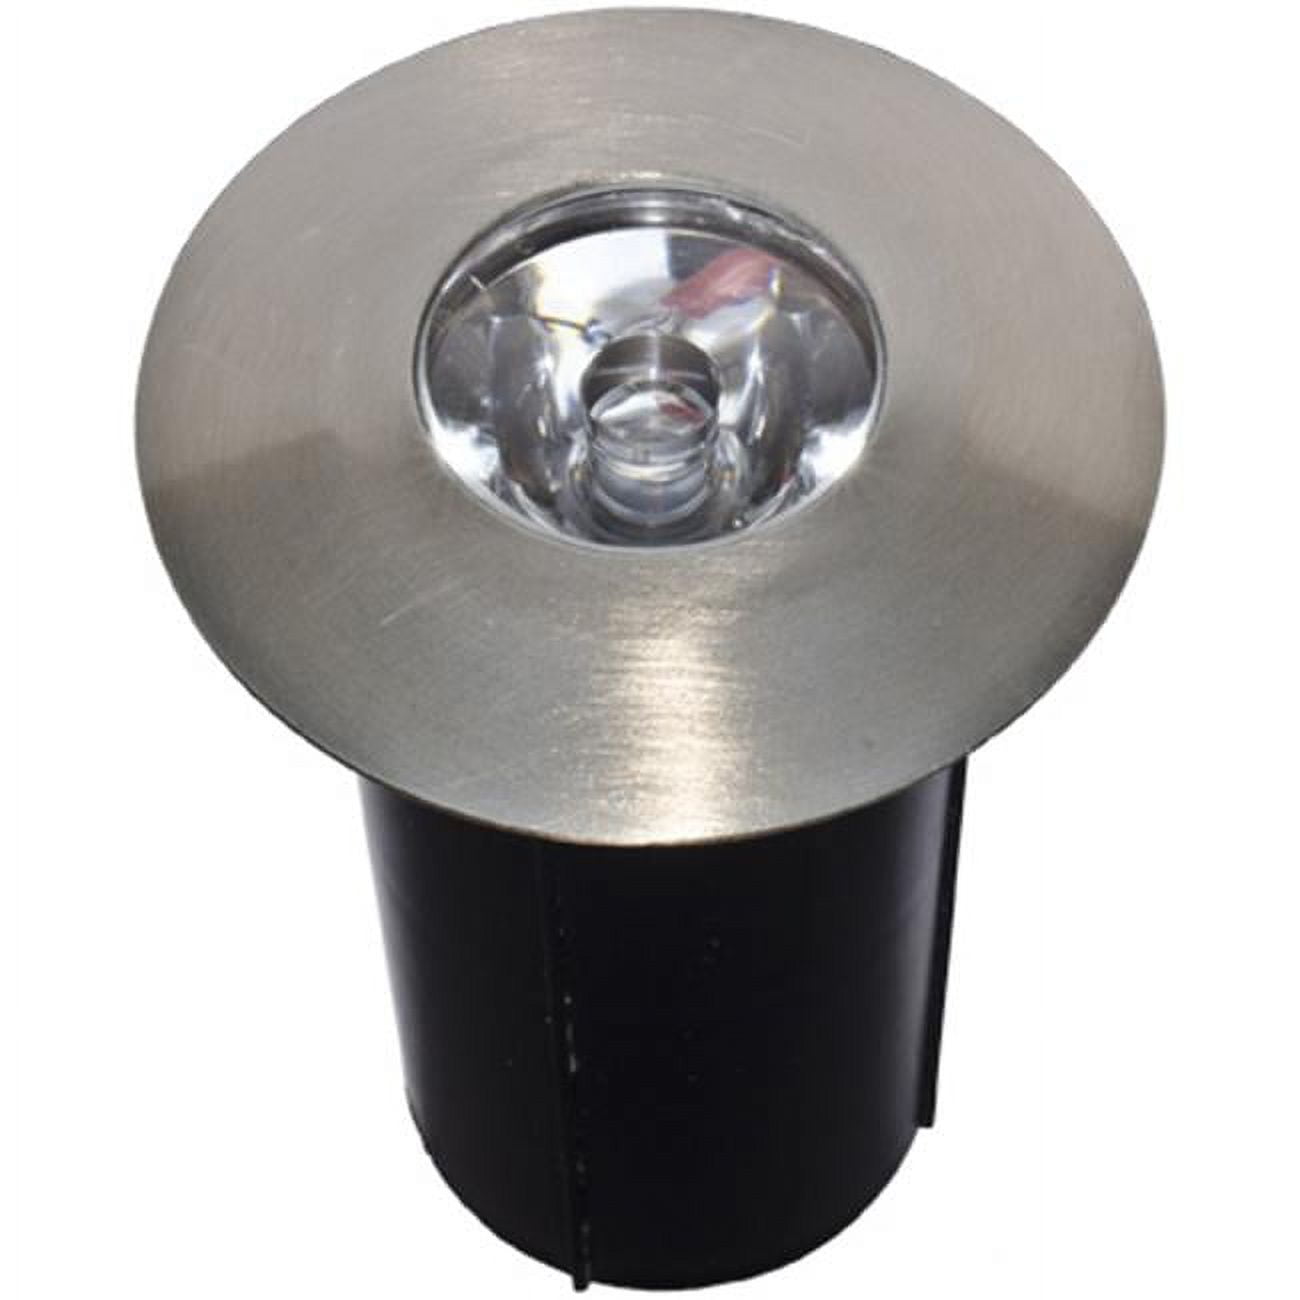 Picture of Dabmar Lighting LV-LED129-SS 1W 12V Brass In-Ground Well Light with Sleeve, Matte Stainless Steel